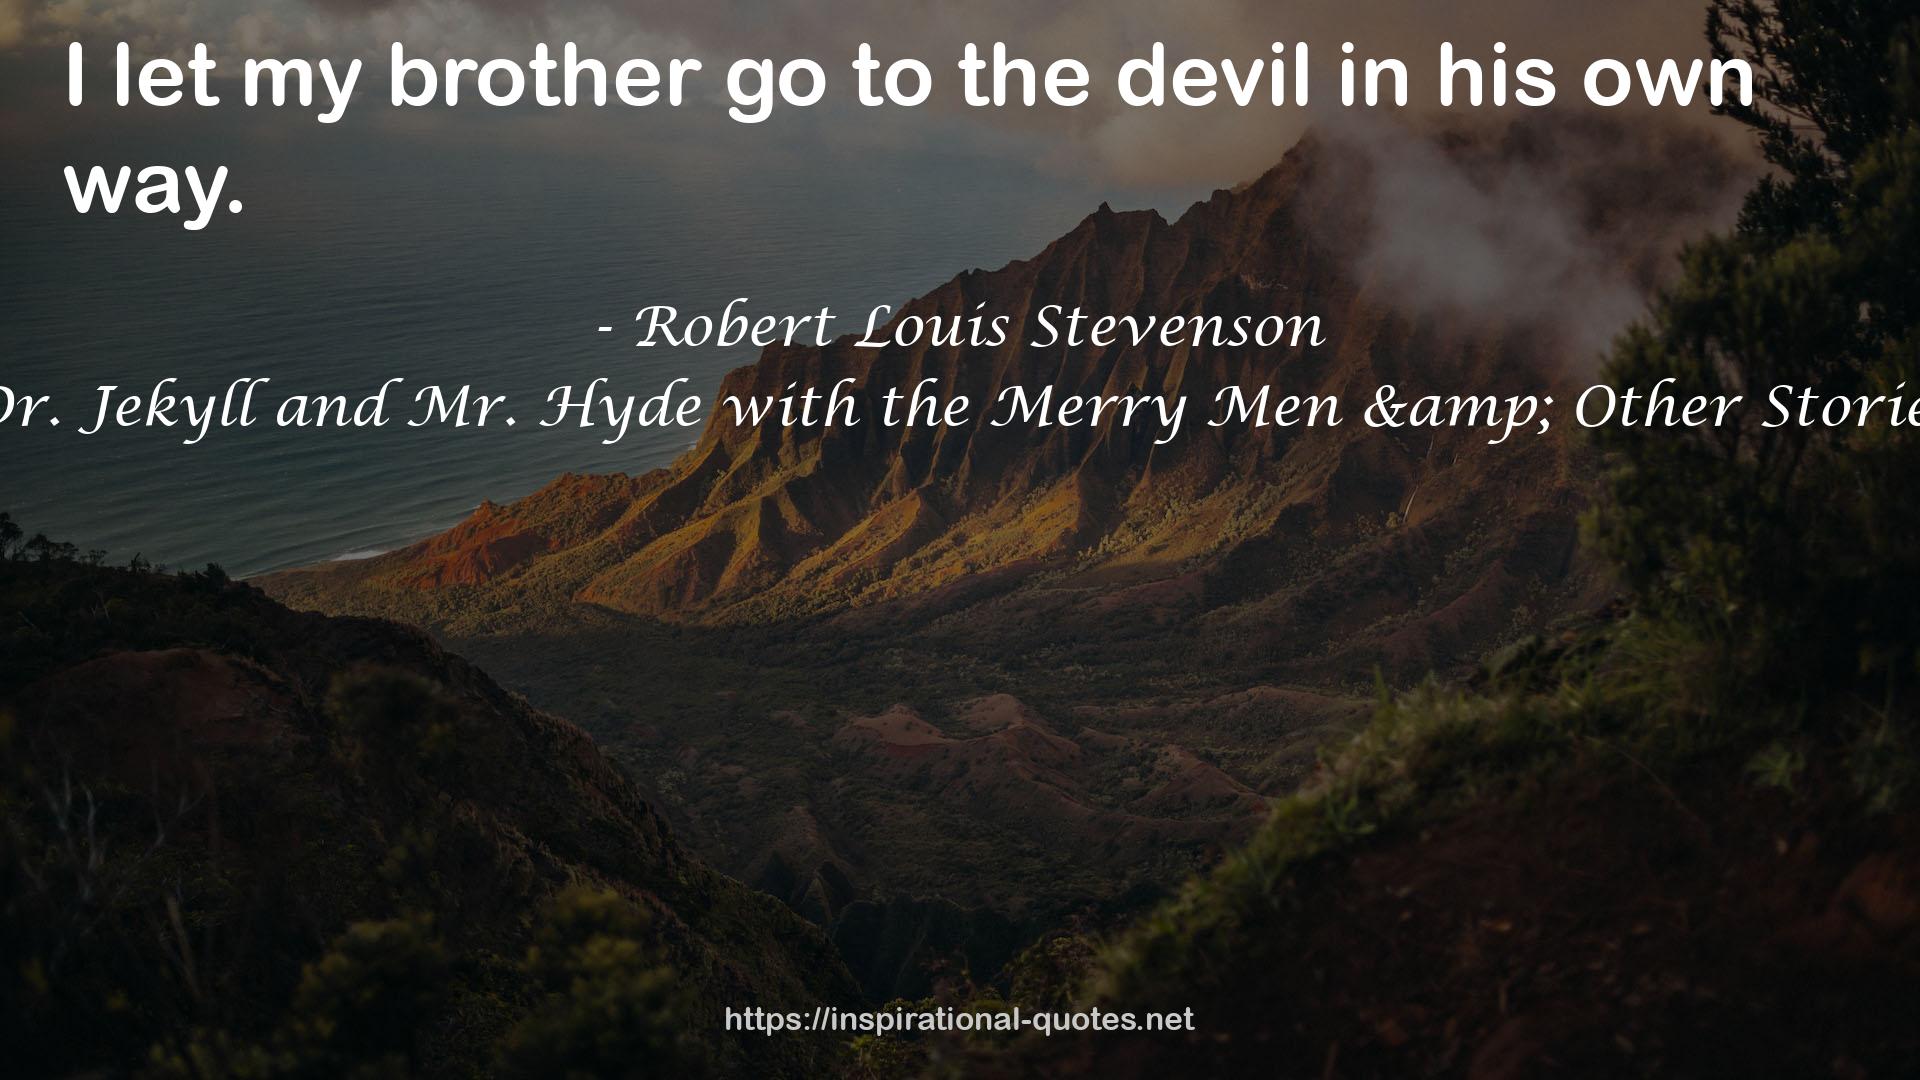 Dr. Jekyll and Mr. Hyde with the Merry Men & Other Stories QUOTES